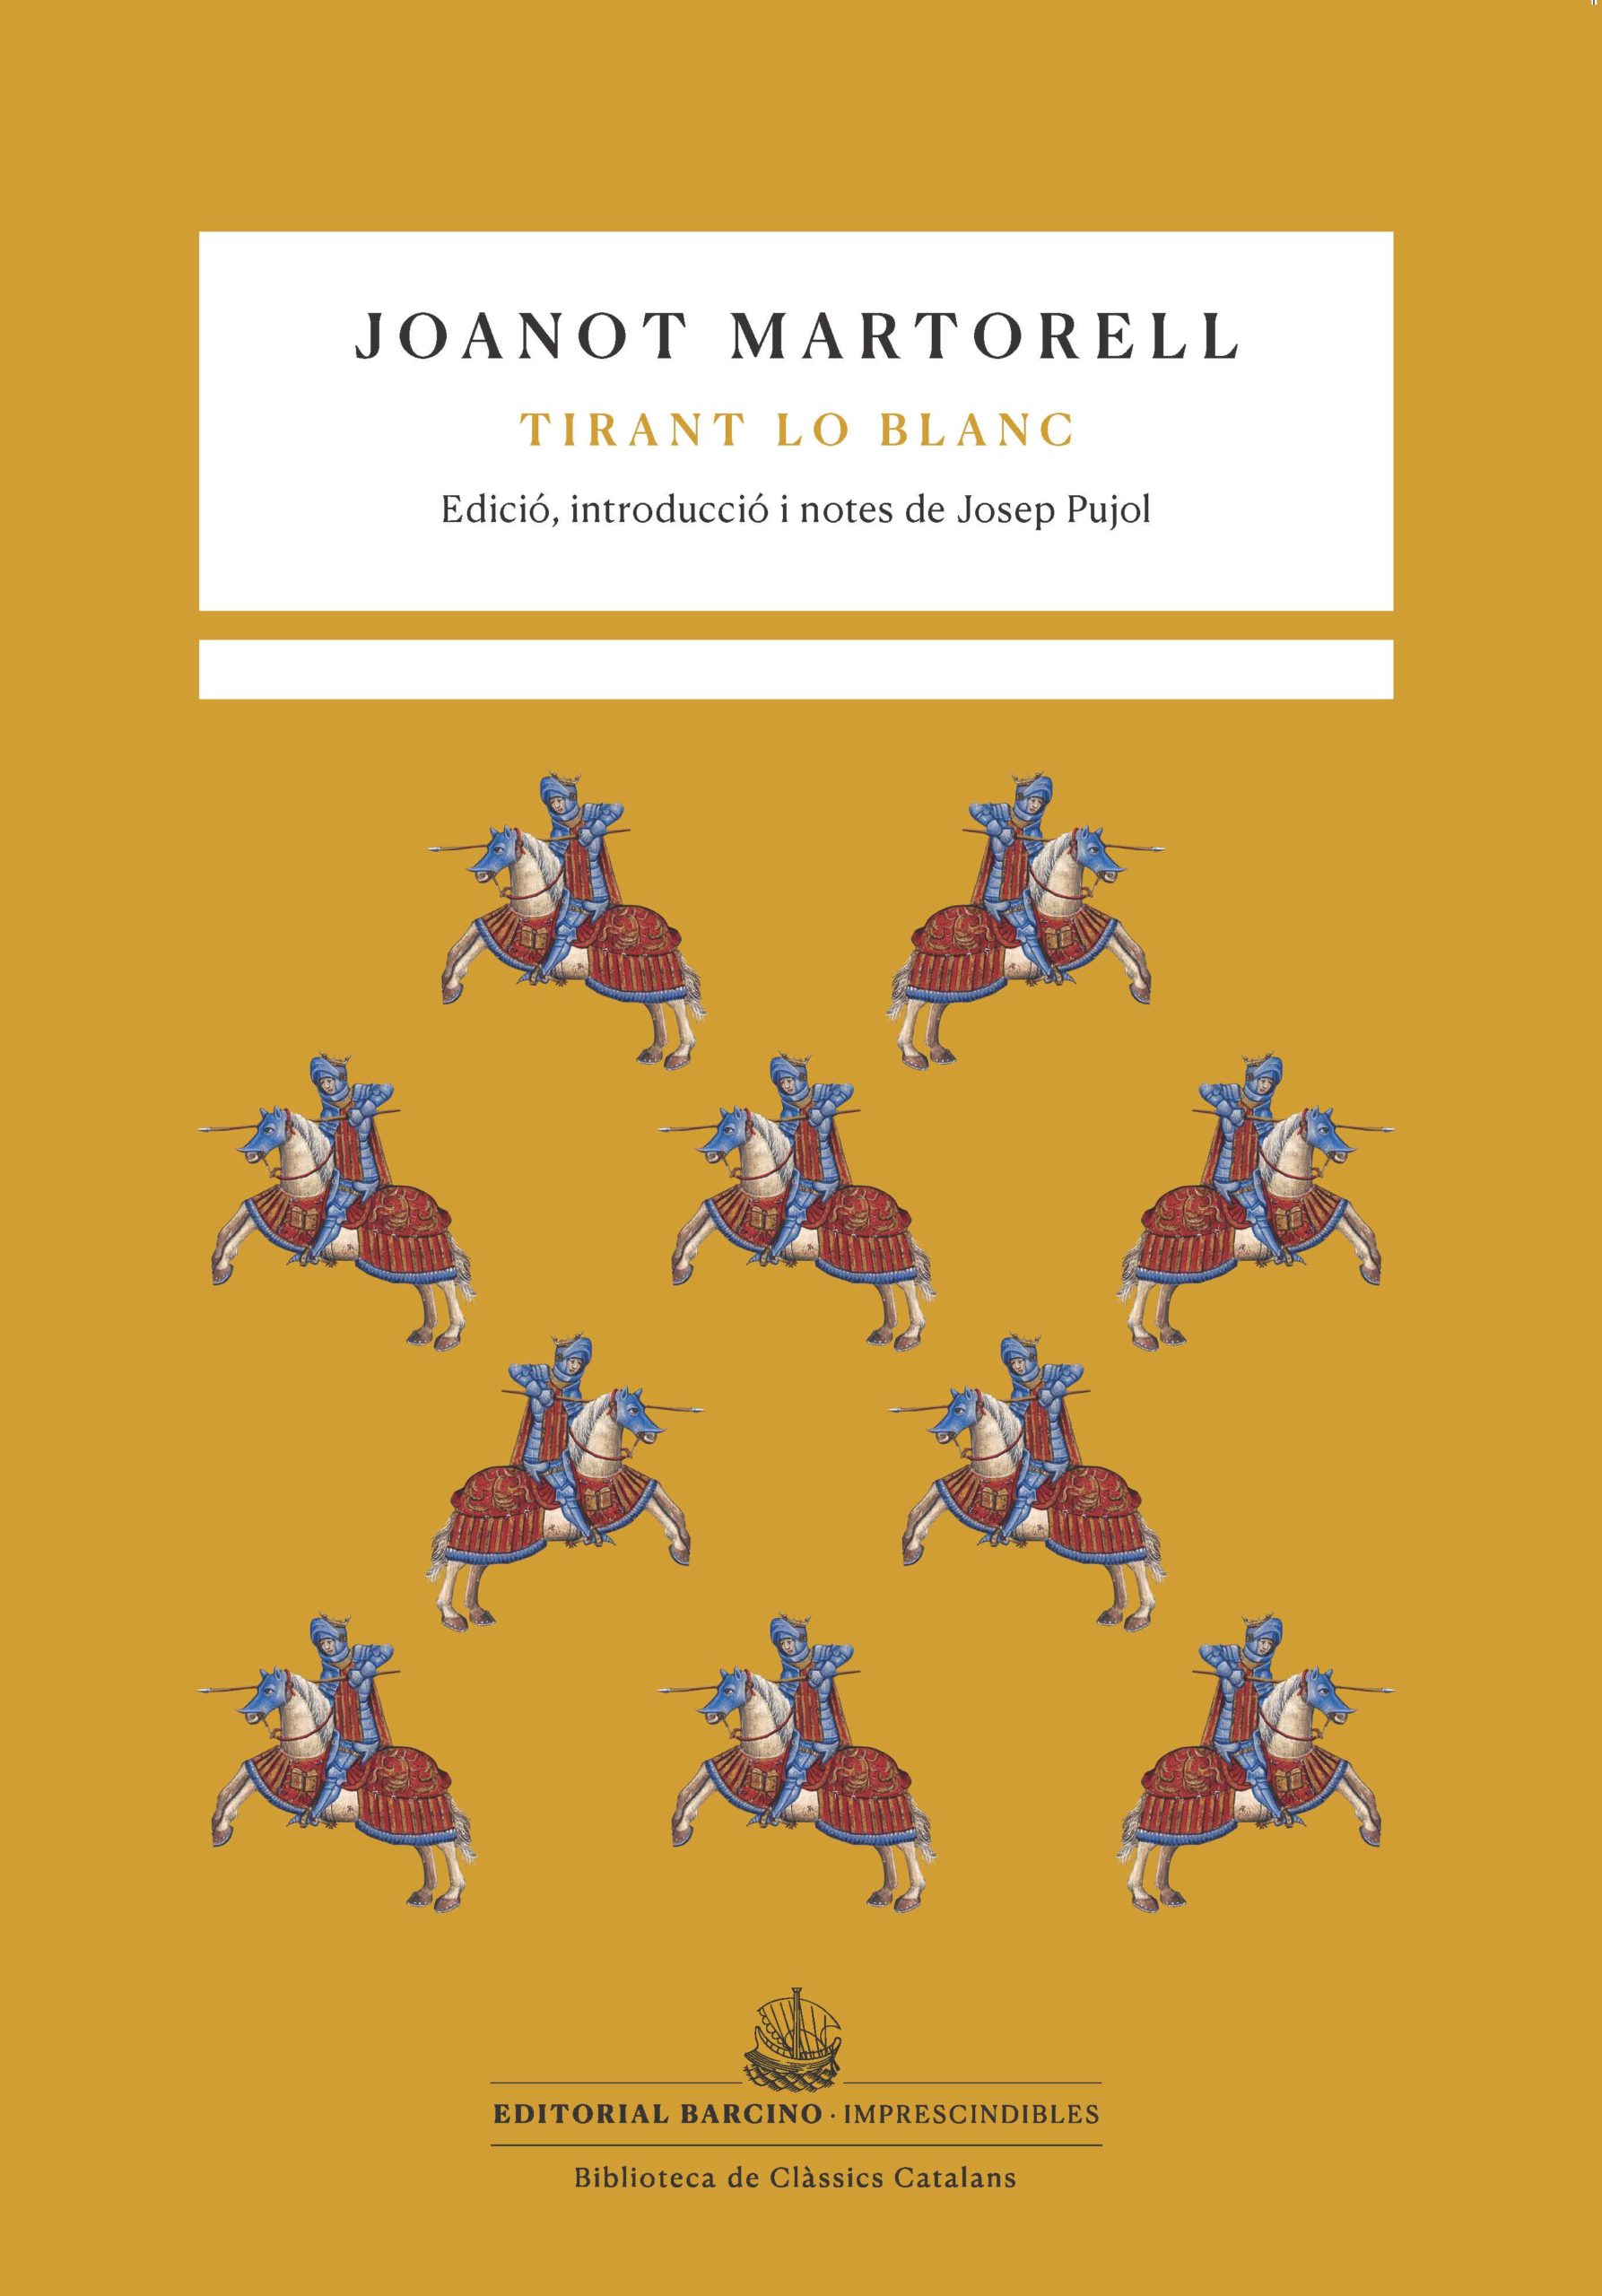 Tirant lo Blanc by Bernat Martorell, cover of the edition